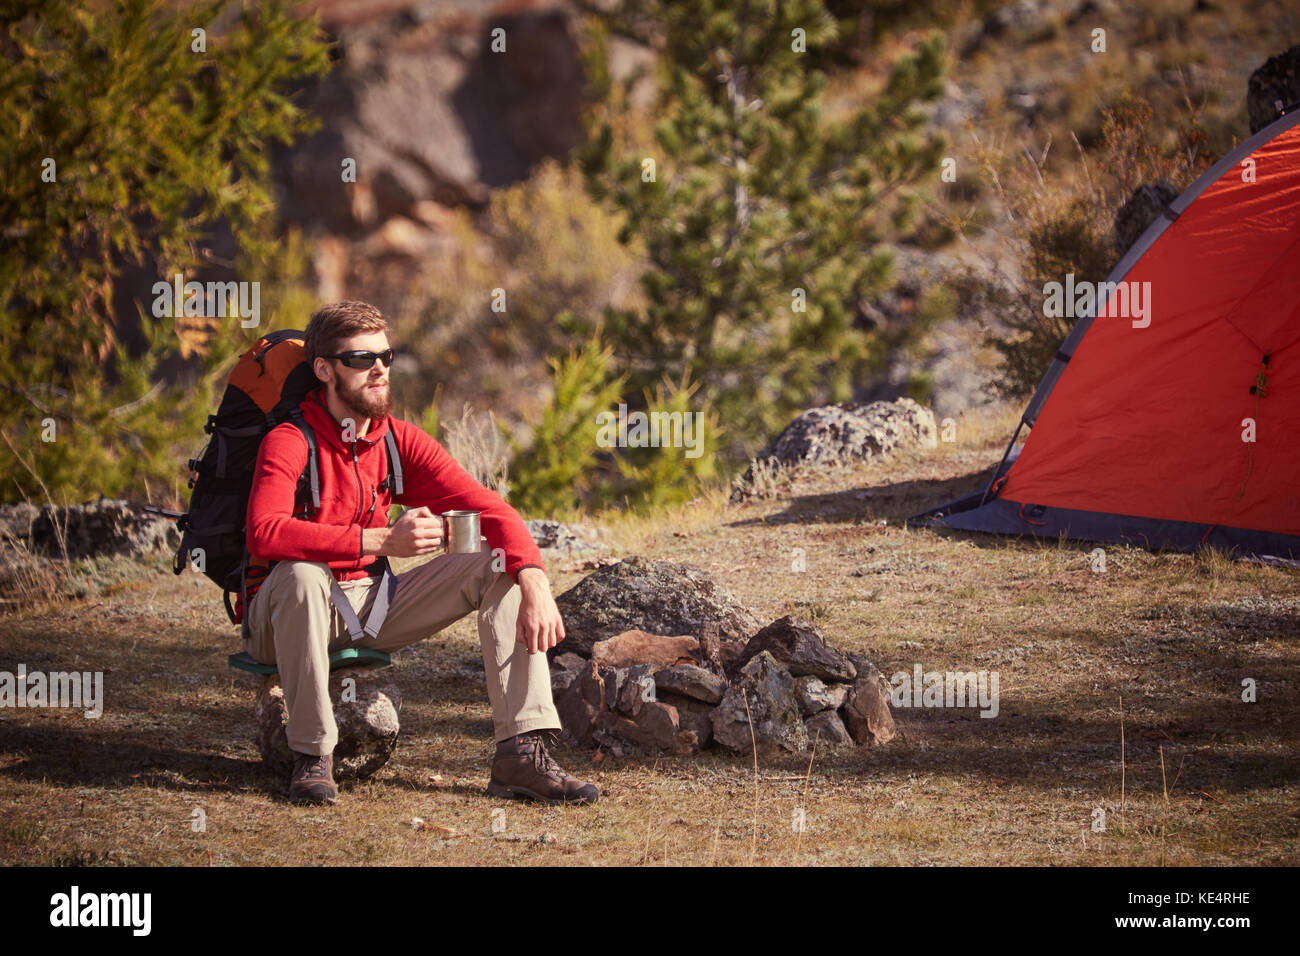 Backpacker having rest near orange tent with cup in hand. Stock Photo